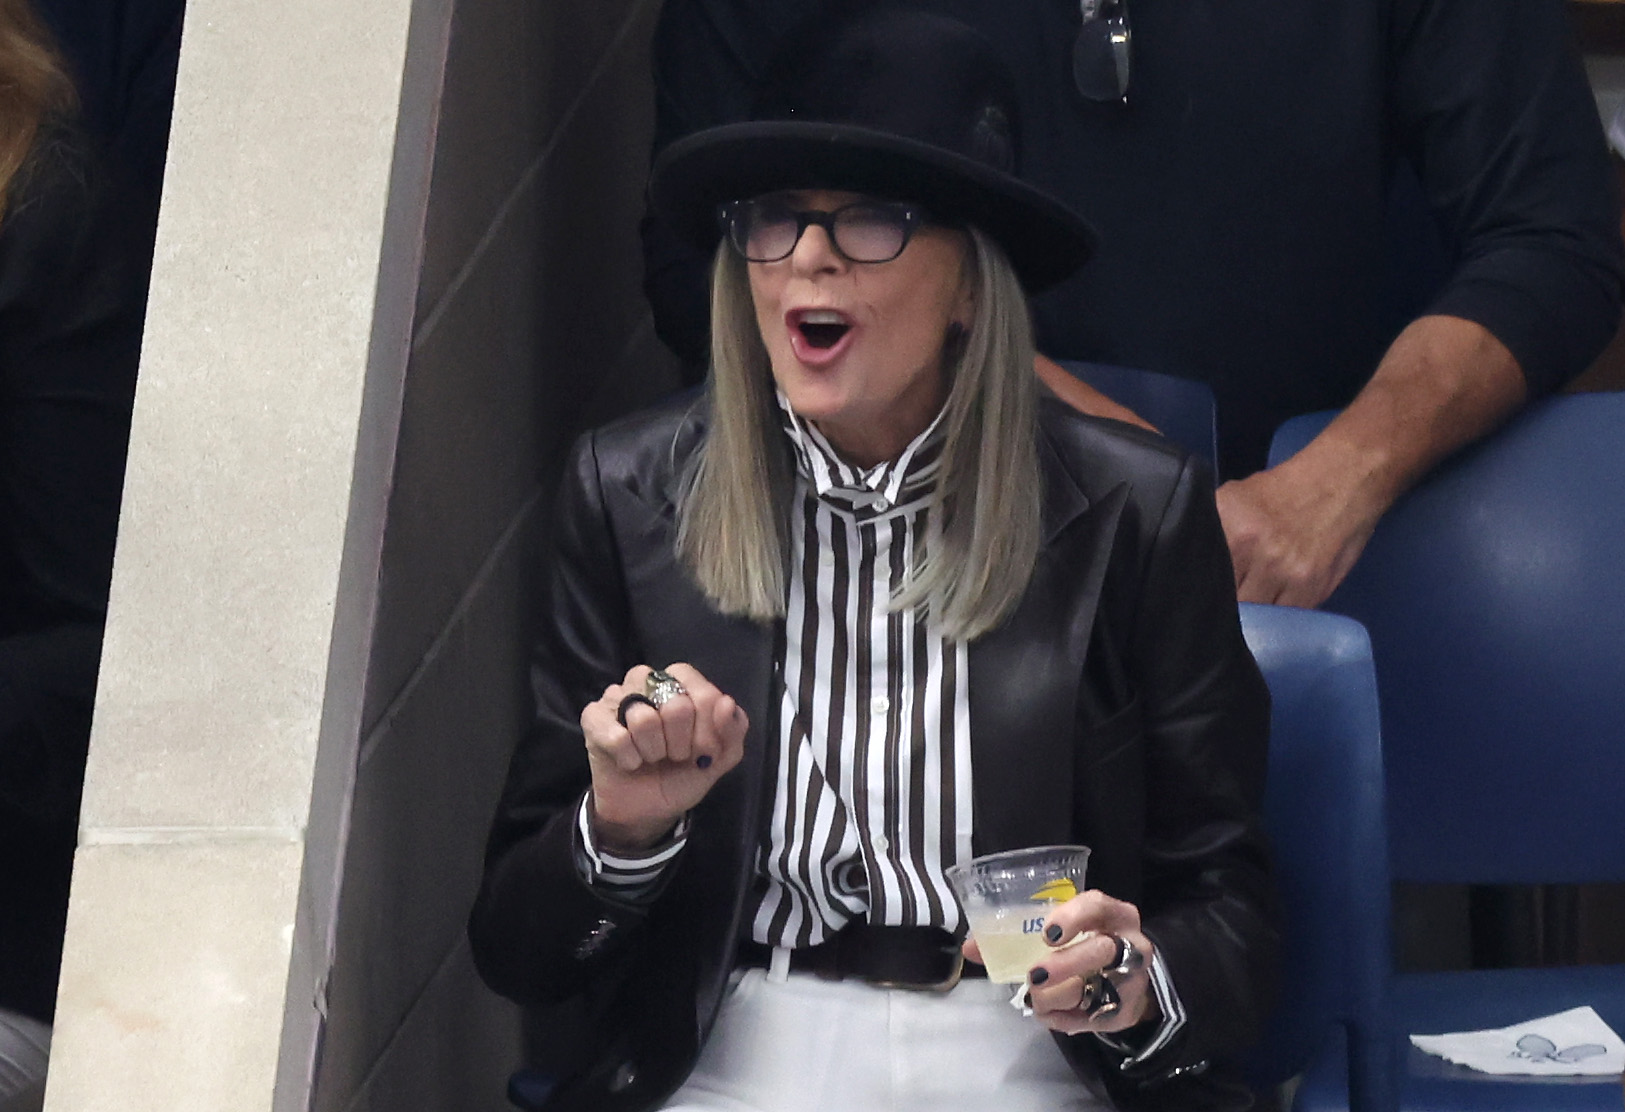 Diane Keaton reacts during the Women's Singles Final match between Coco Gauff and Aryna Sabalenka at the 2023 US Open at the USTA Billie Jean King National Tennis Center, on September 9, 2023 in New York City. | Source: Getty Images